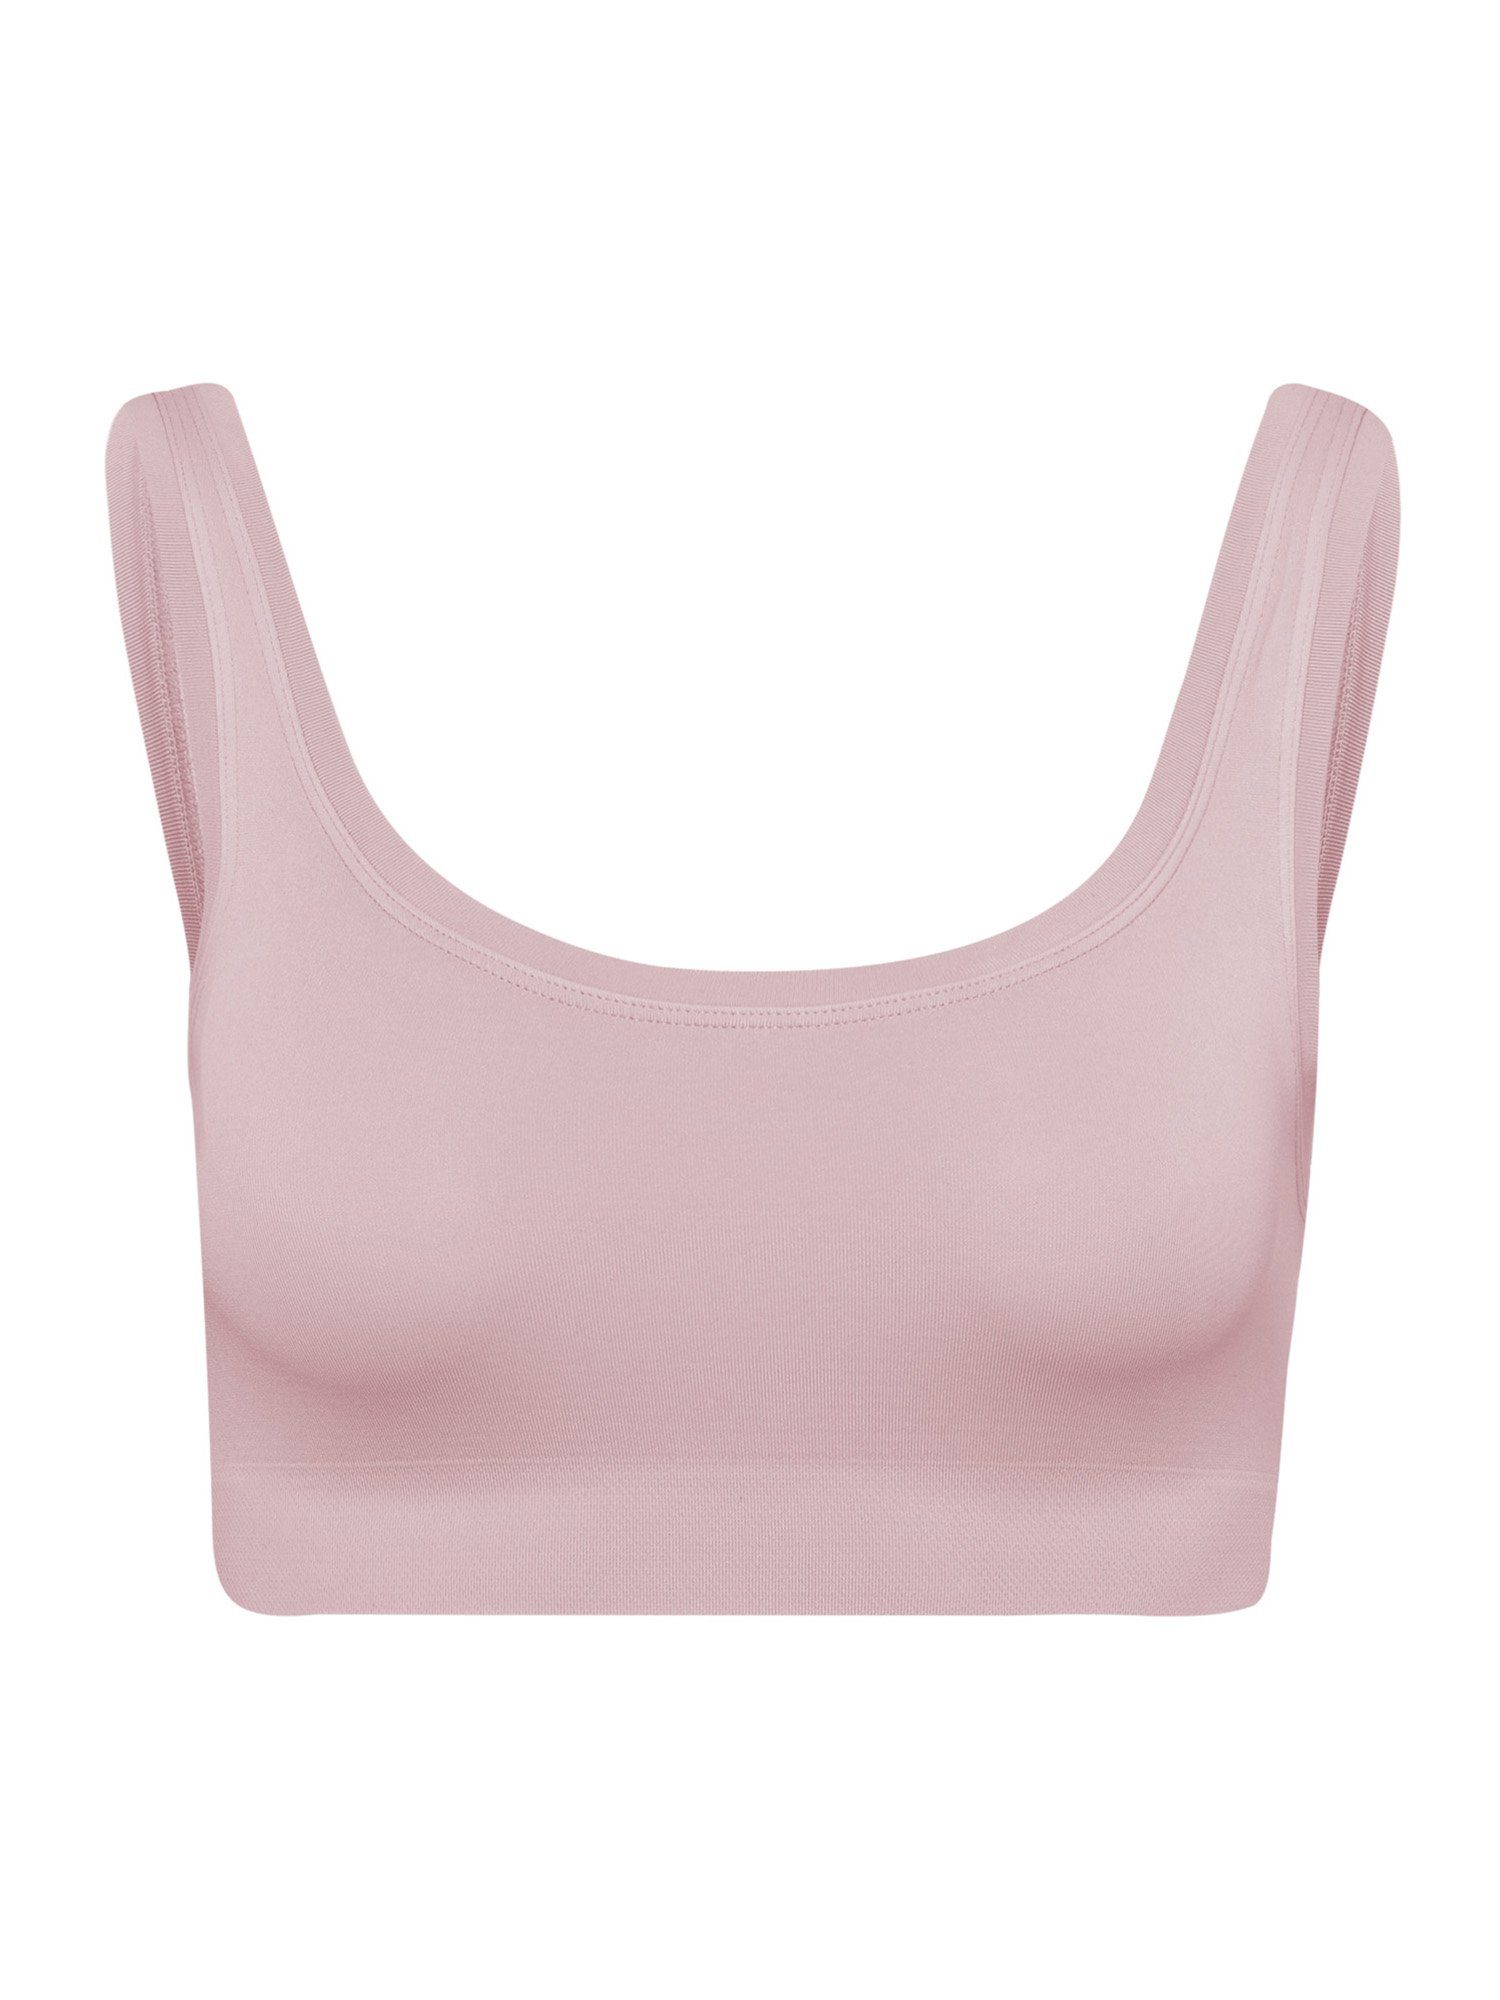 Hanro Bustier Touch Feeling crepe pink | Bustiers